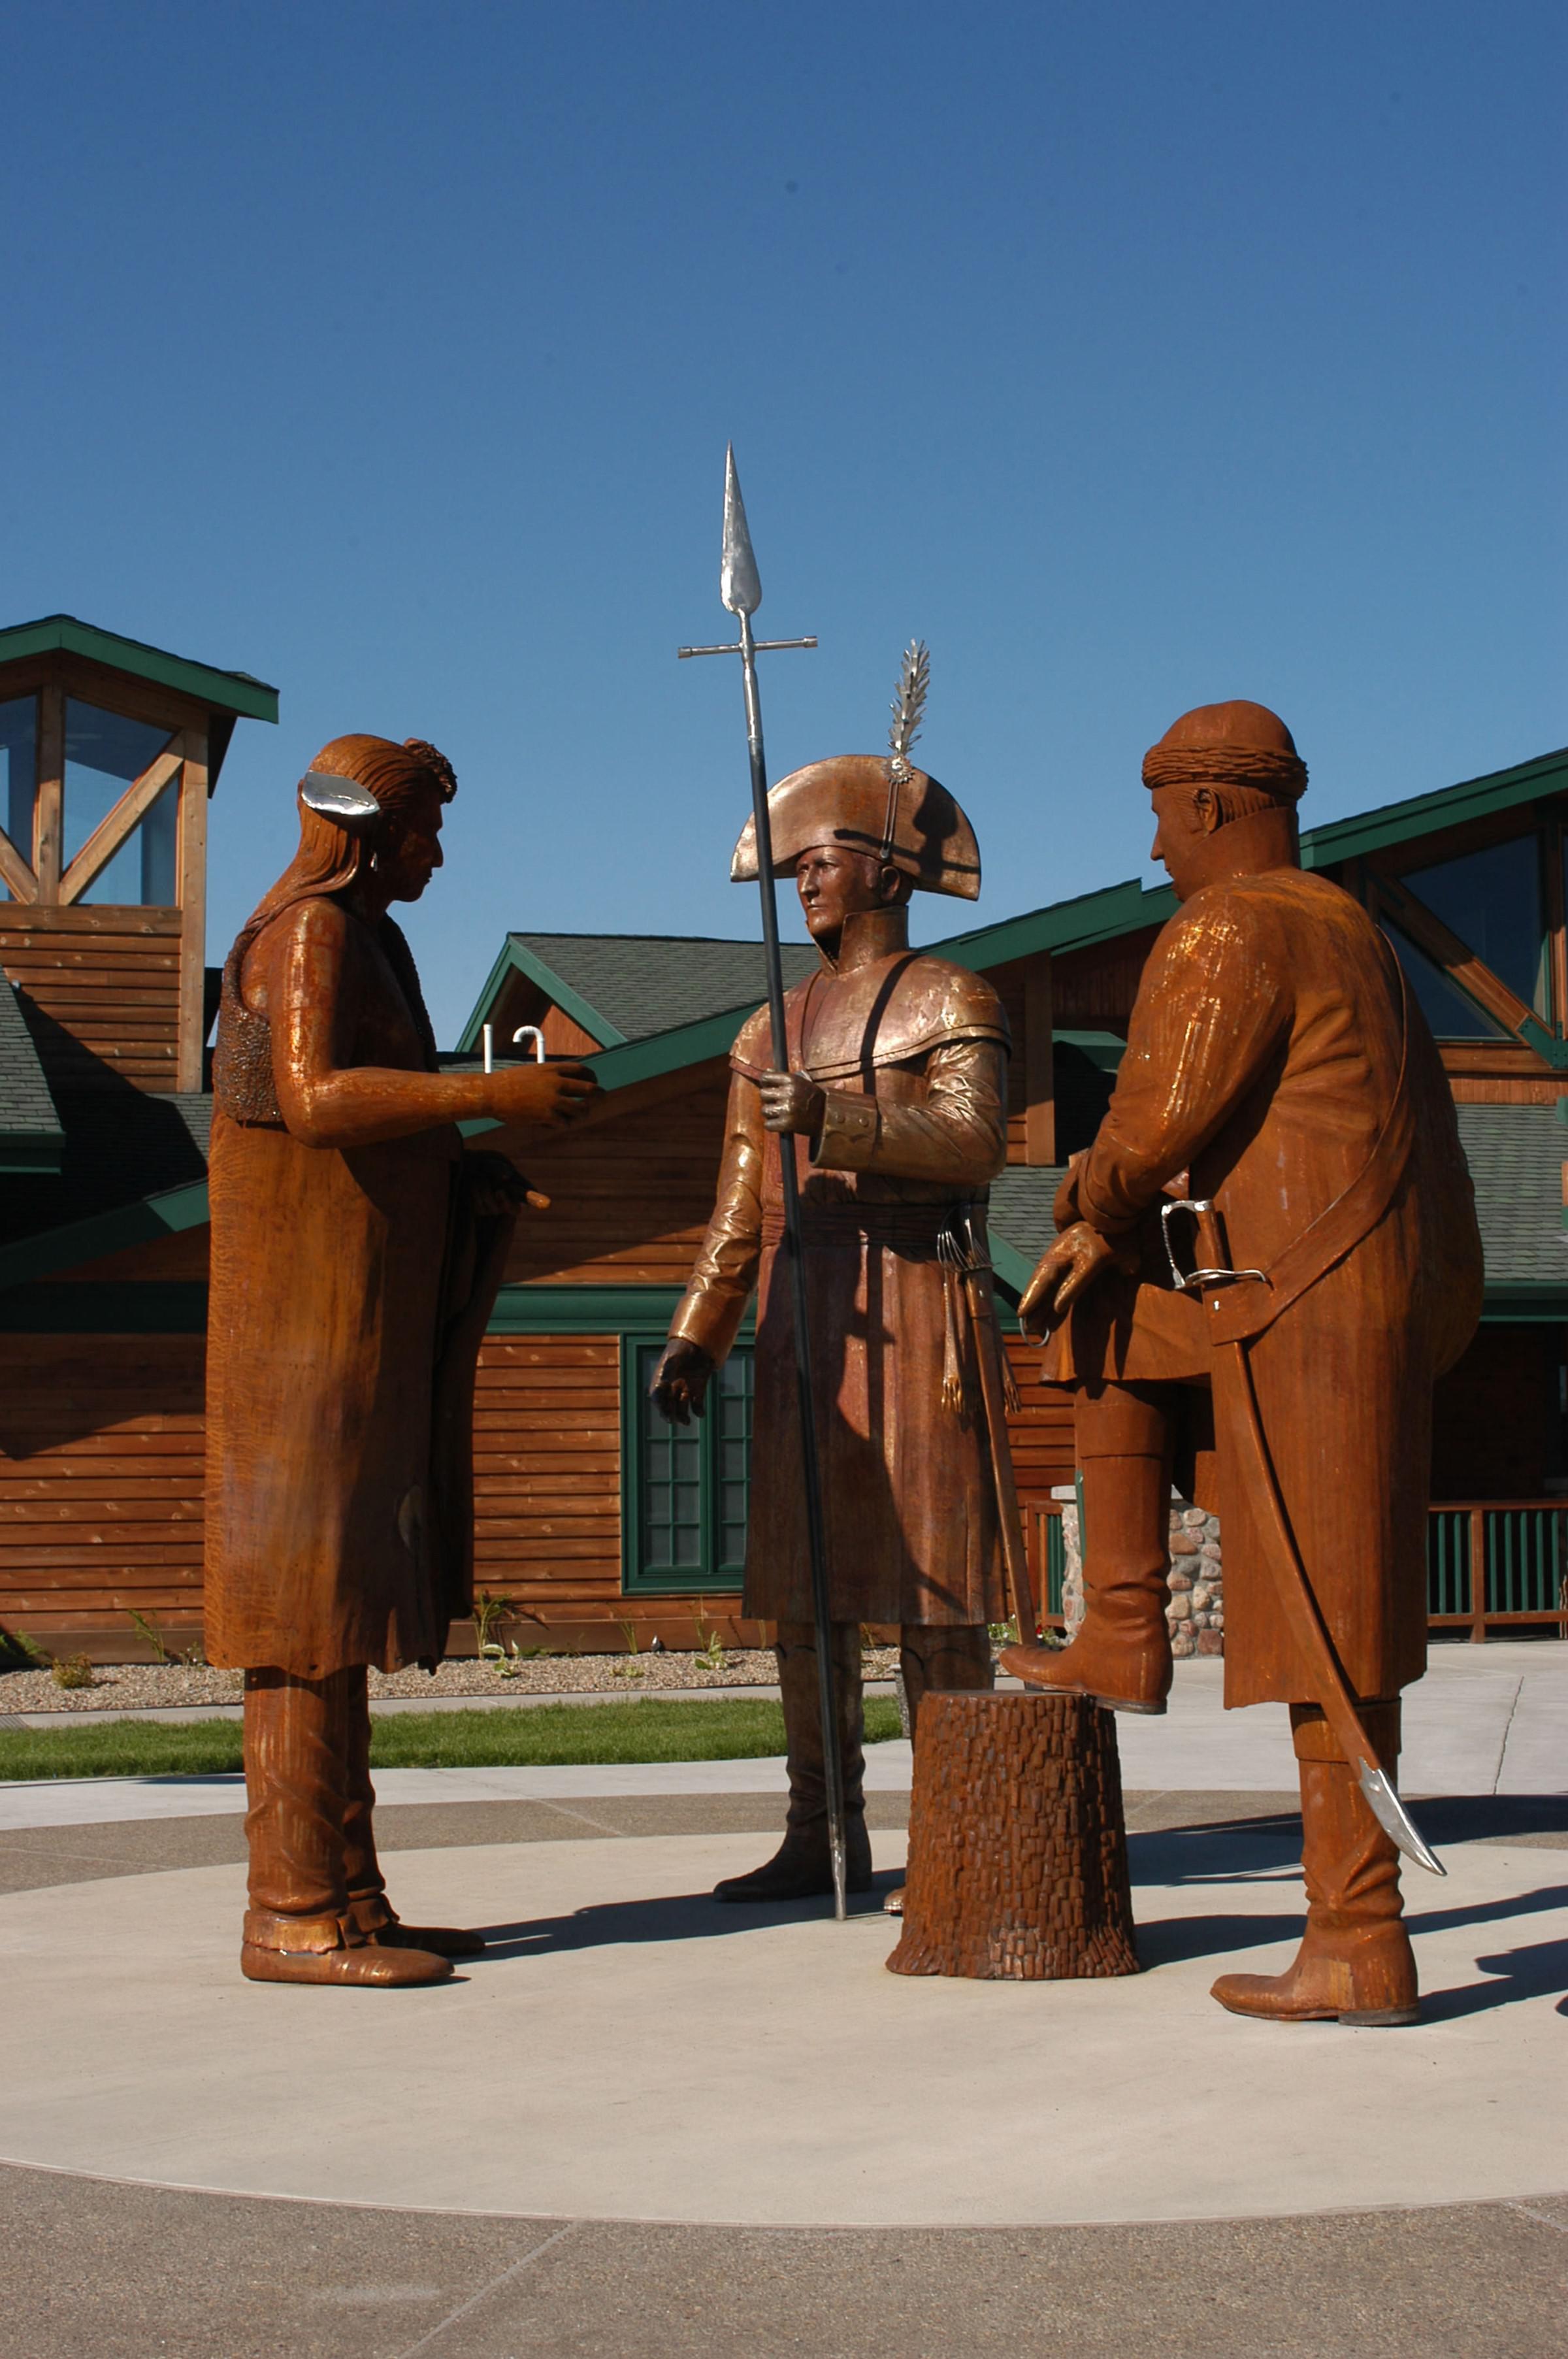 Larger than life statues at the Lewis and Clark Interpretive Center and Fort Mandan State Historic Site in Washburn, North Dakota.